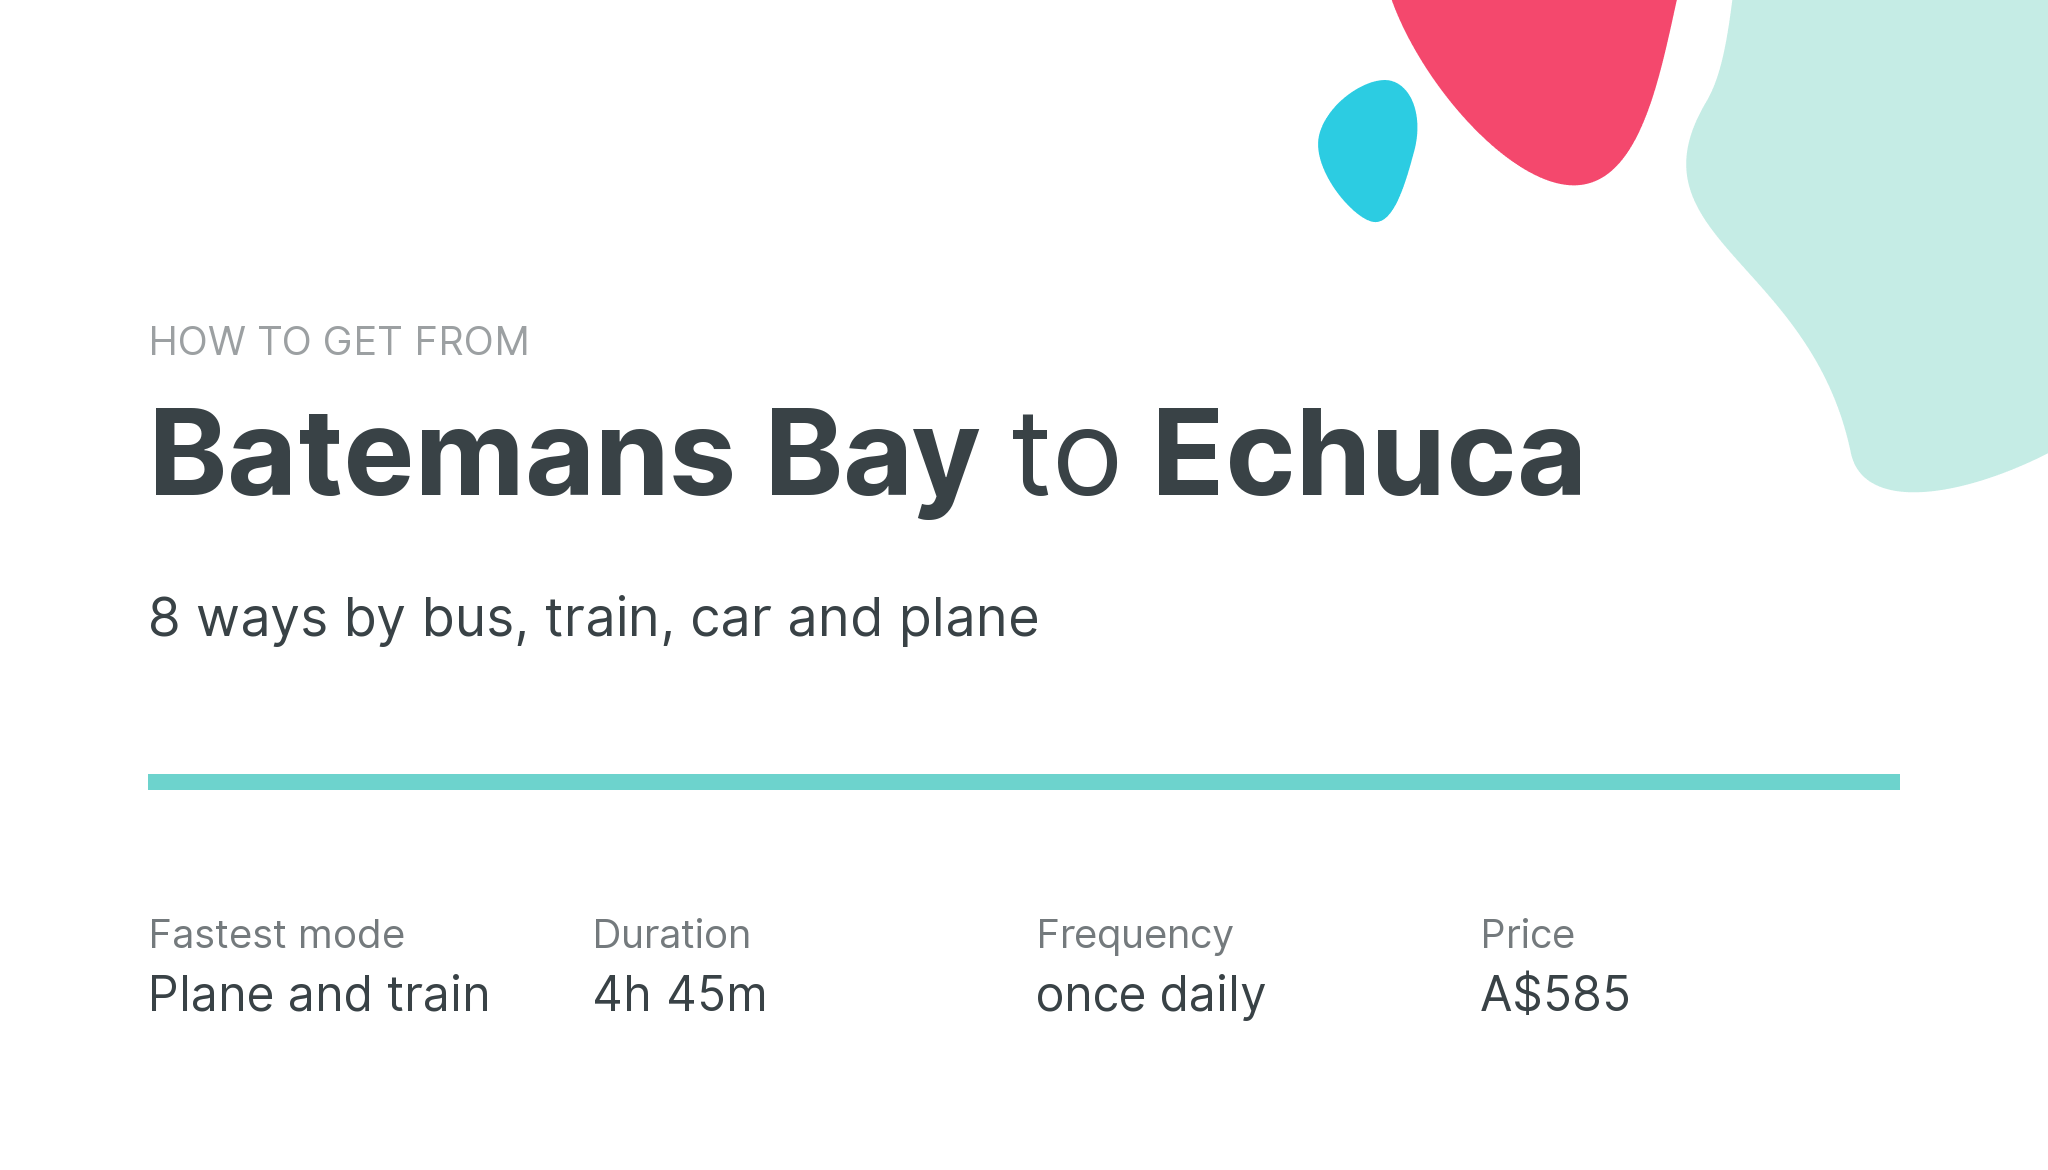 How do I get from Batemans Bay to Echuca